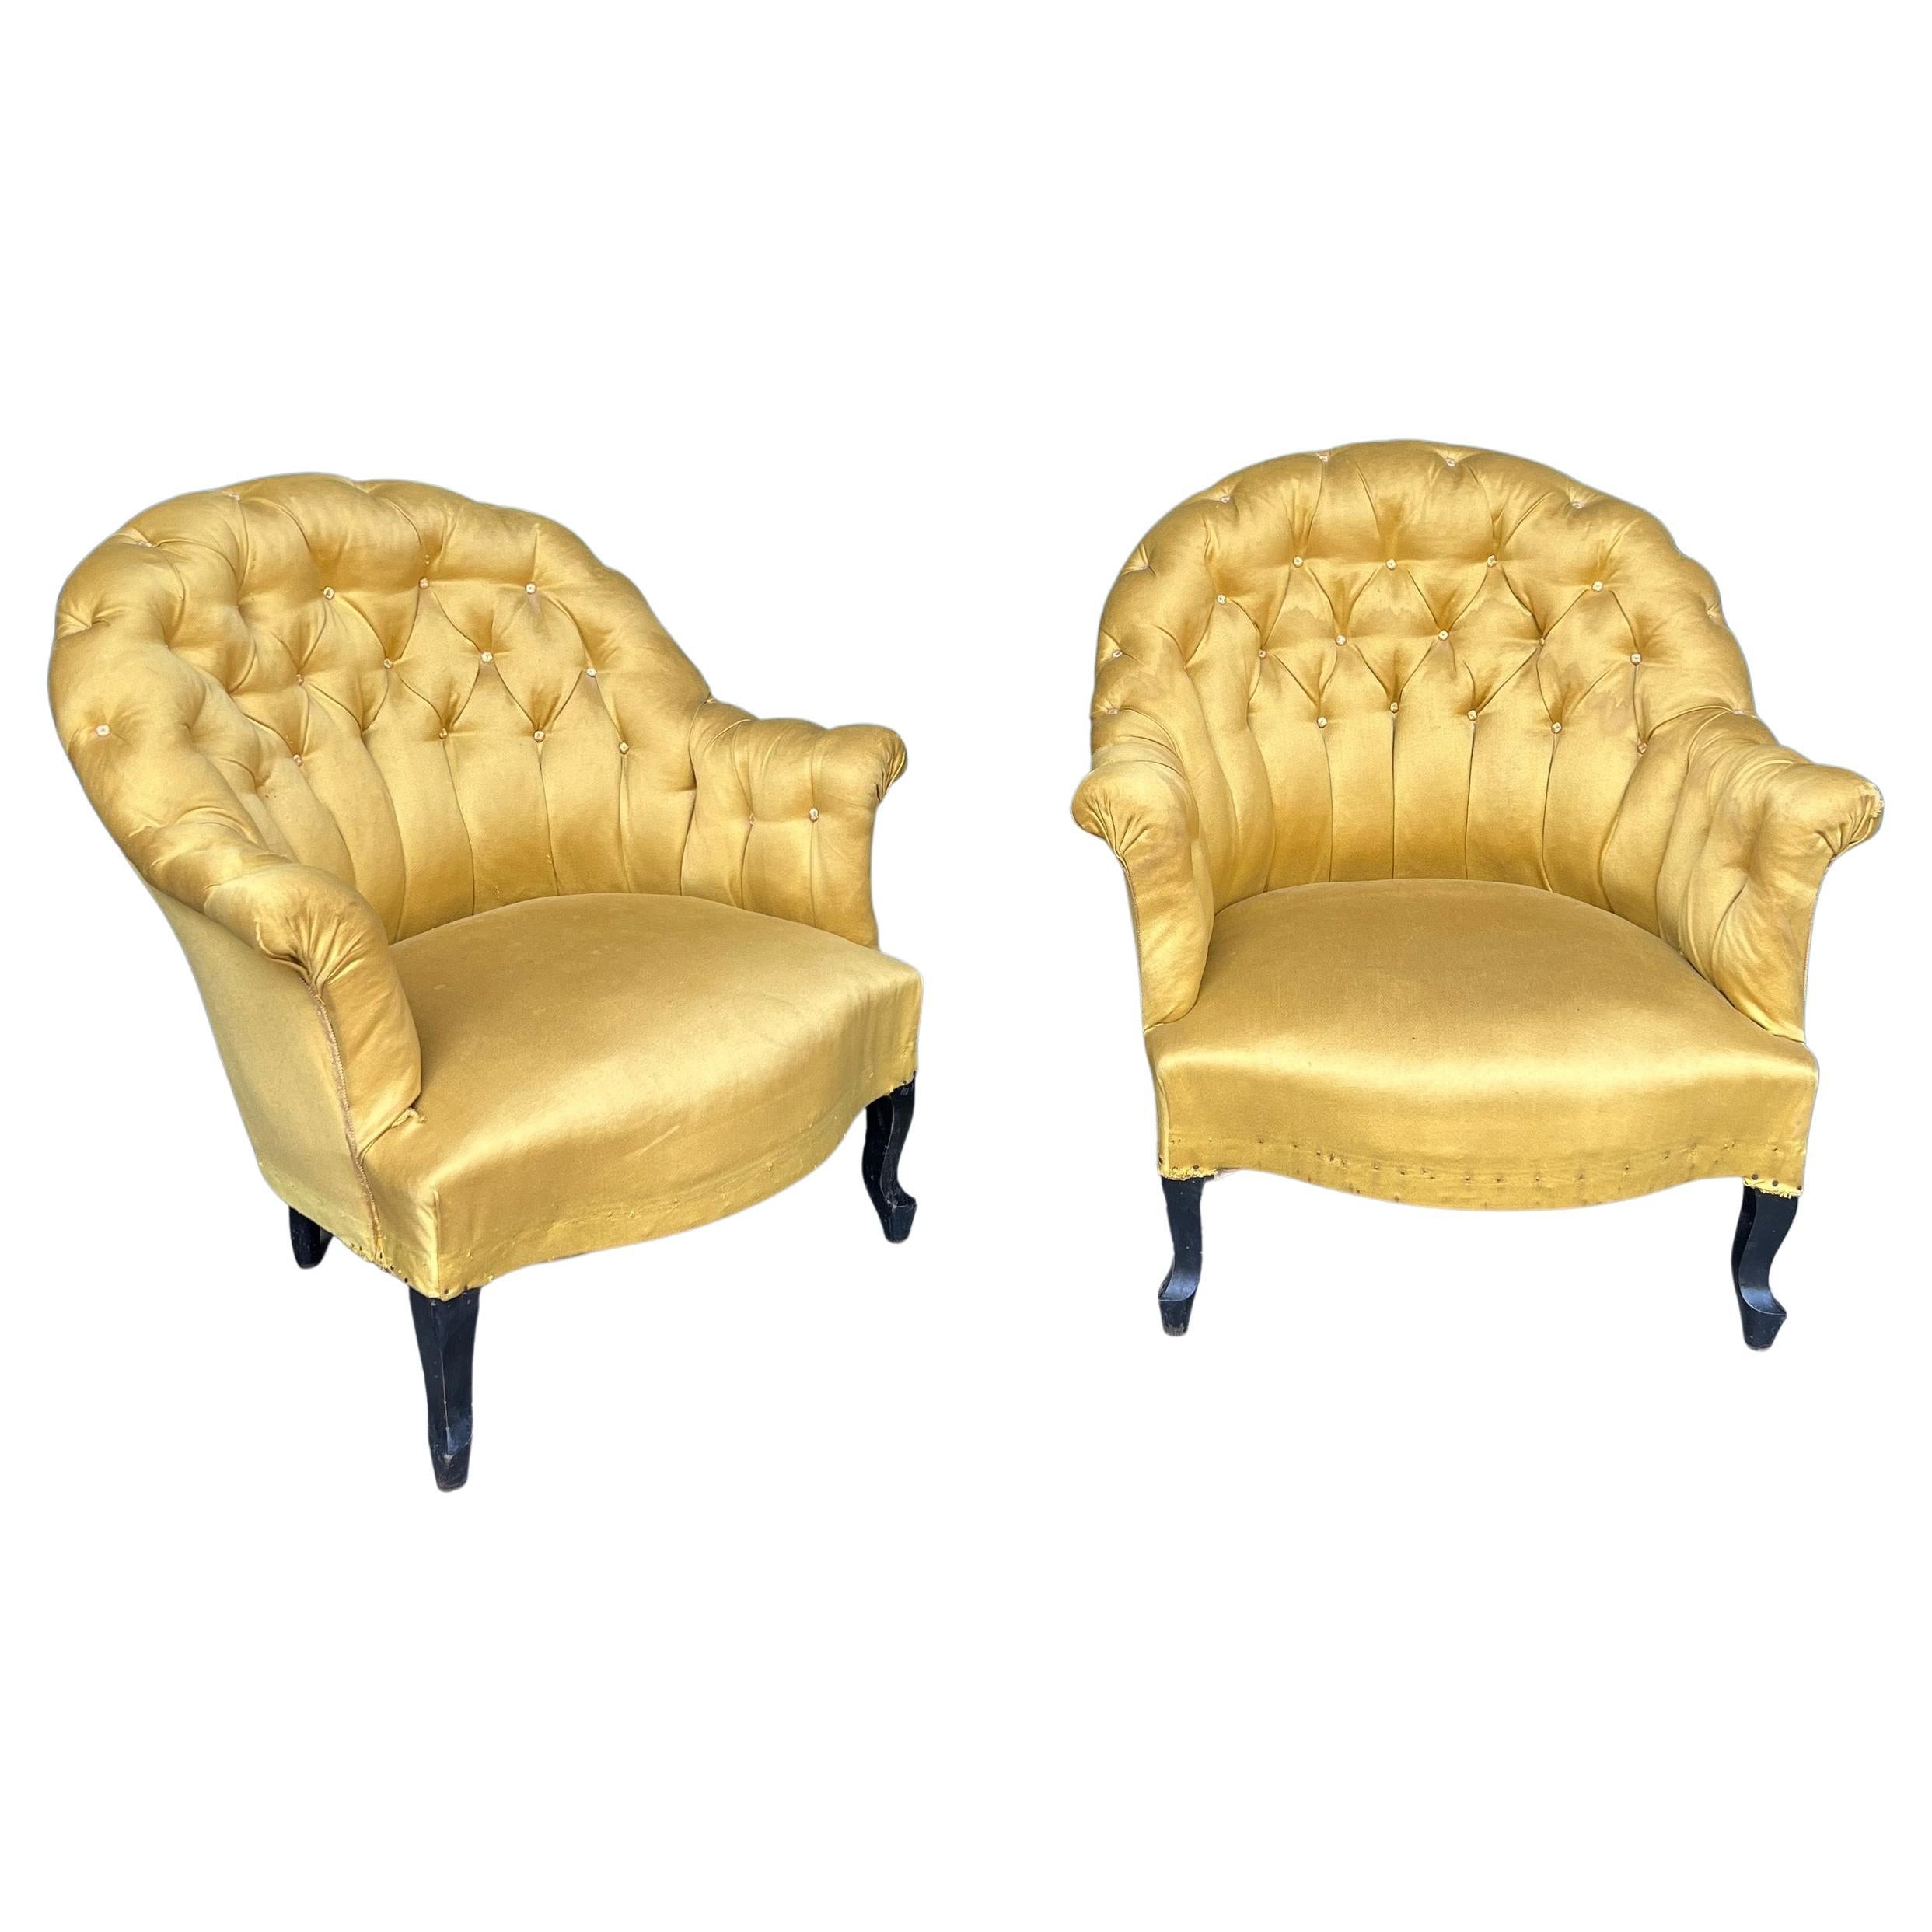 Pair of French Napoleon III Tufted Arm Chairs in Gold Fabric For Sale